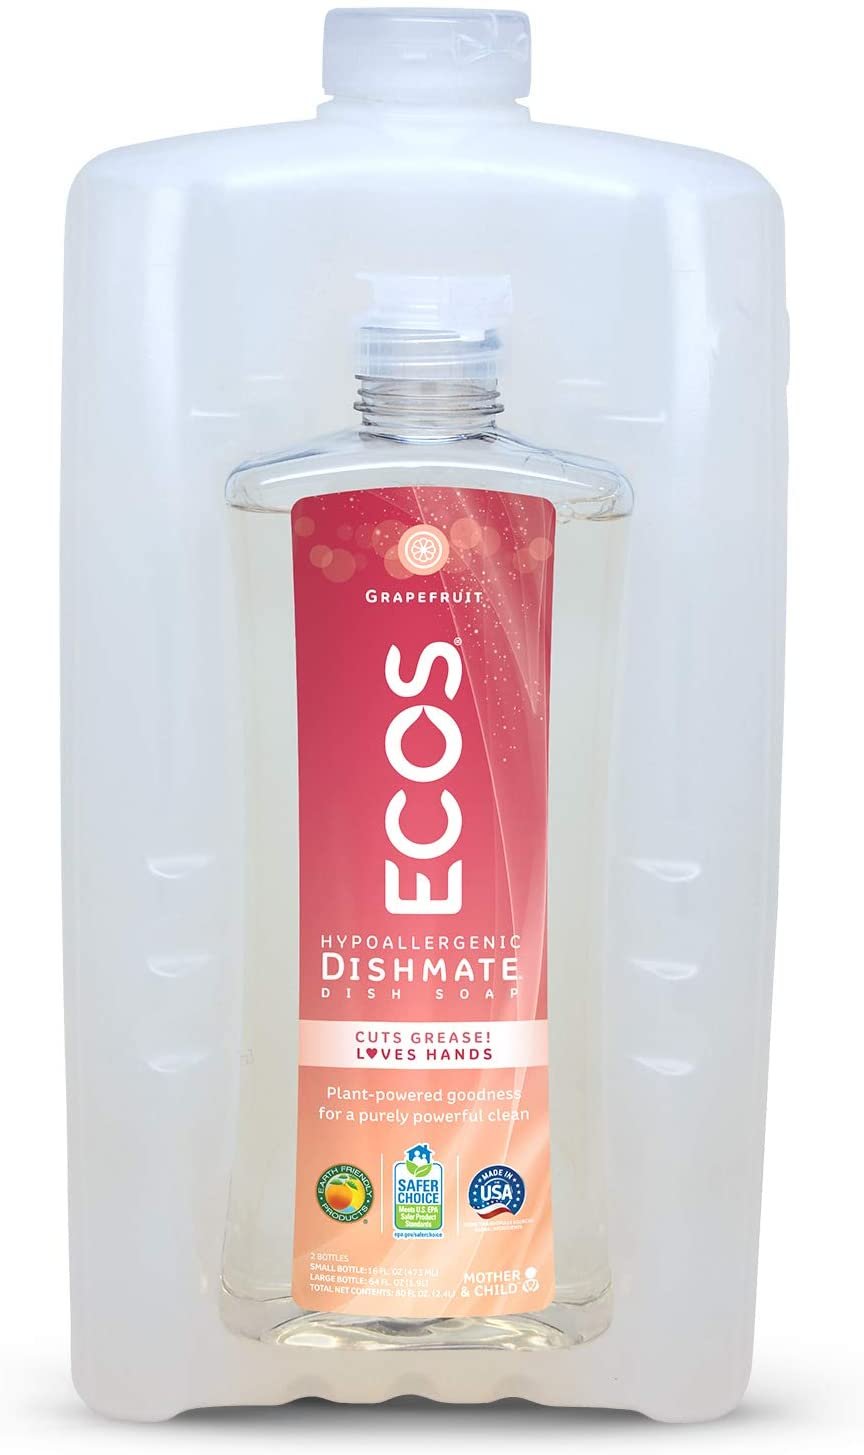 Non Toxic, Hypoallergenic Dishmate,  Grapefruit, Ultra-Concentrated,  Without Dyes, Parabens, Phosphates, Phthalates, Pack of  1,  80 FL OZ Per Pack